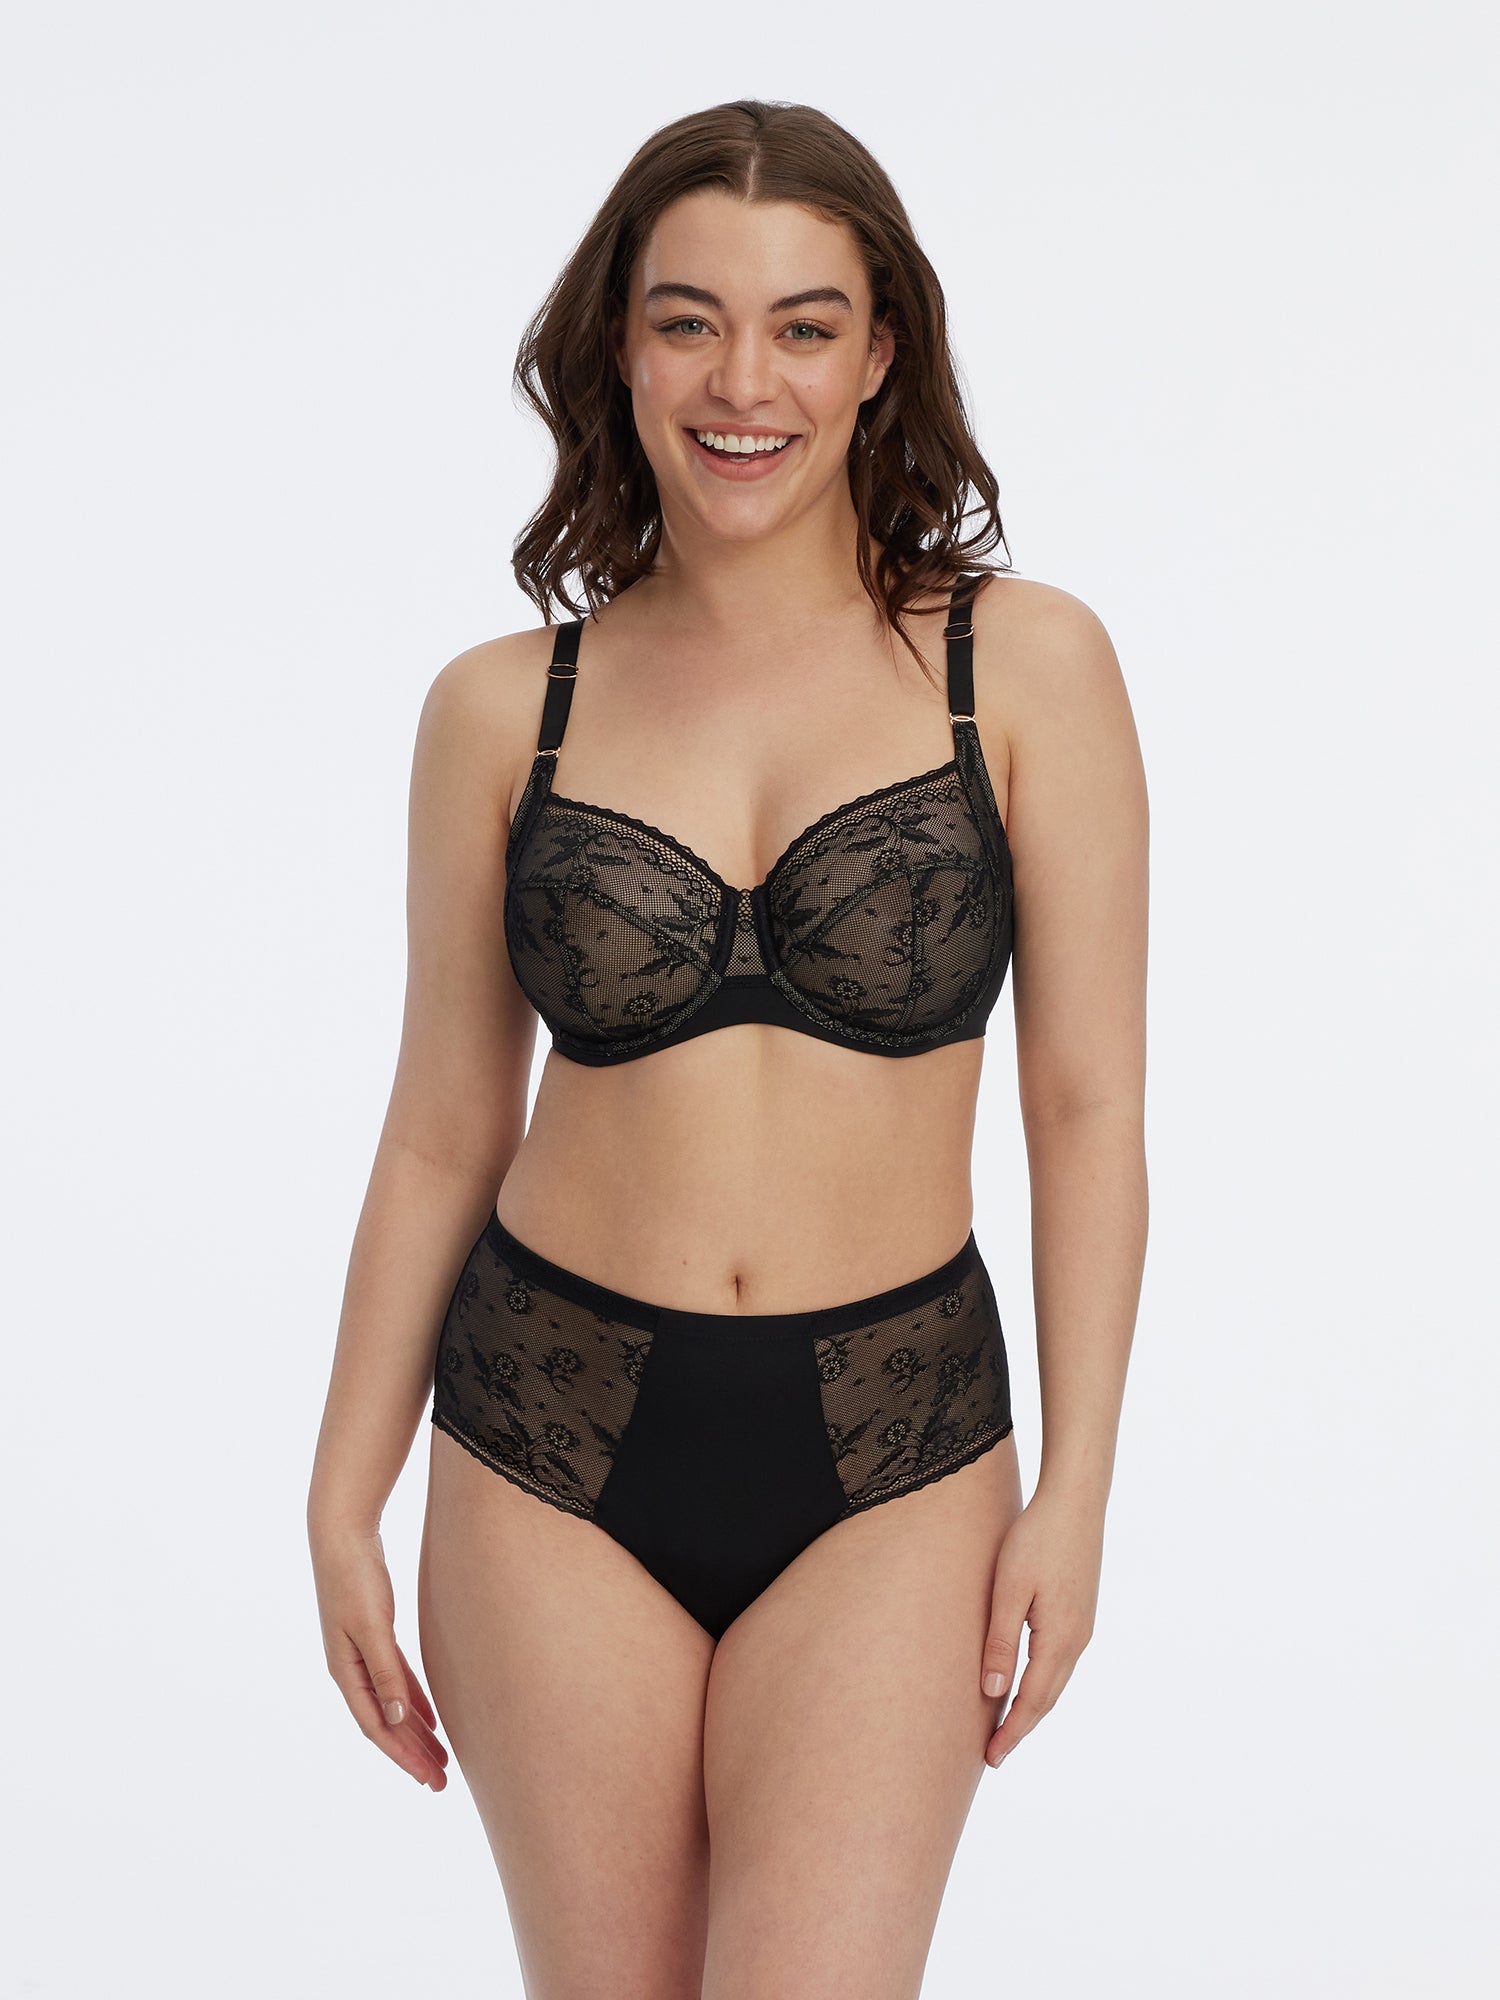 Elevate Lifestyle - Check out I. C. London Lingerie, The Bra